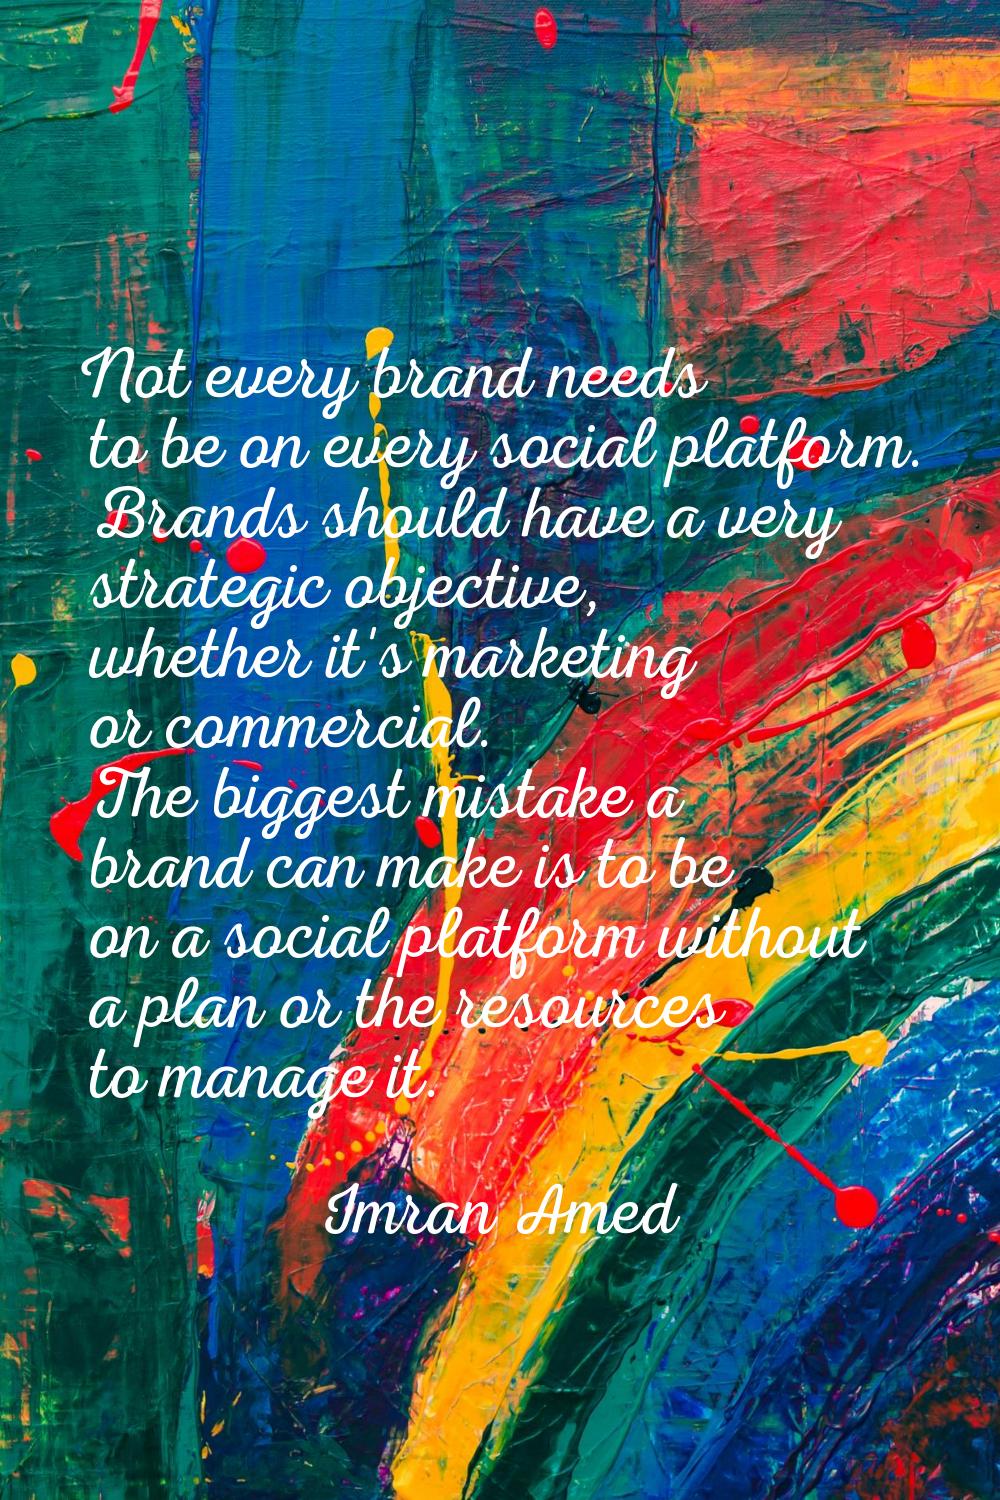 Not every brand needs to be on every social platform. Brands should have a very strategic objective